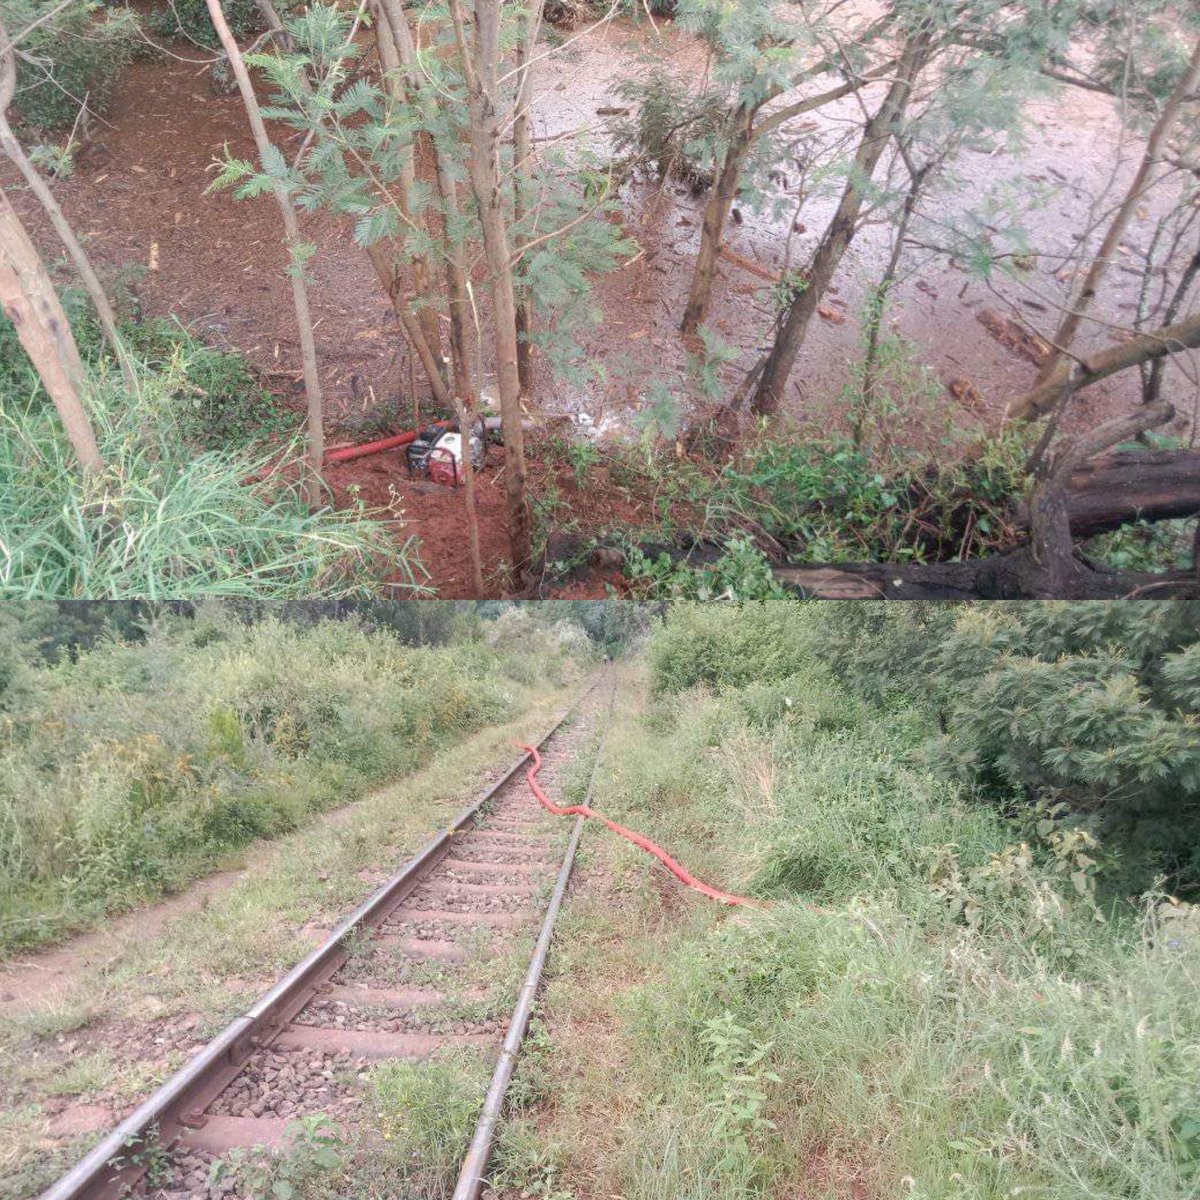 Frame 1: The unplanned dam caused by engineering malfeasance of @KenyaRailways_ at Kijabe Forest in different angles. 

Frame 2: The small pump brought by @KenyaRailways_ to drain that huge water body. 

Like these idiots couldn’t really be bothered. 

And then through religion…